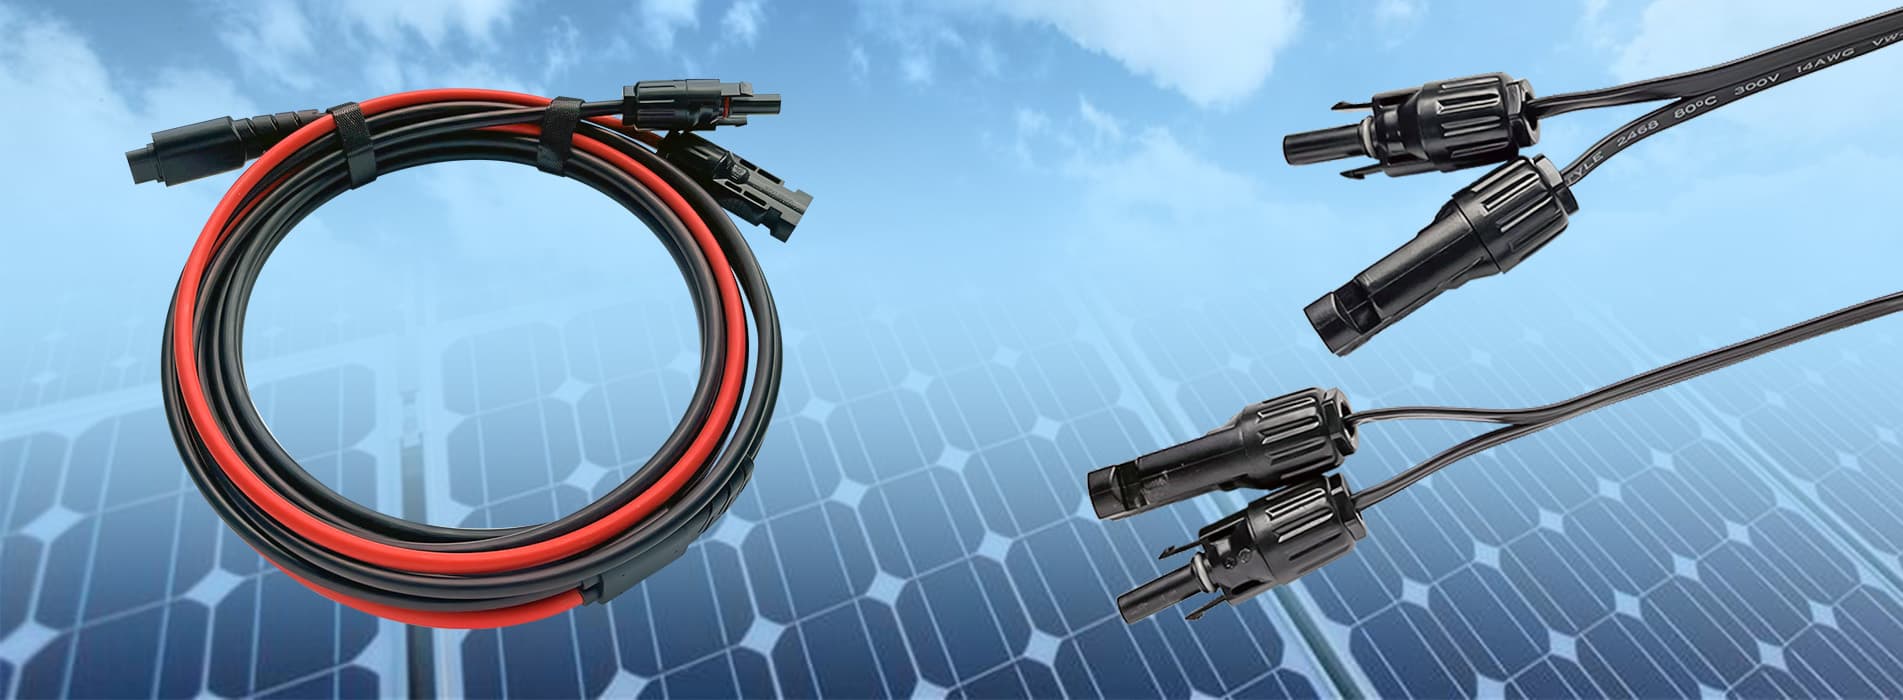 Solar Panel Connectors And Cables